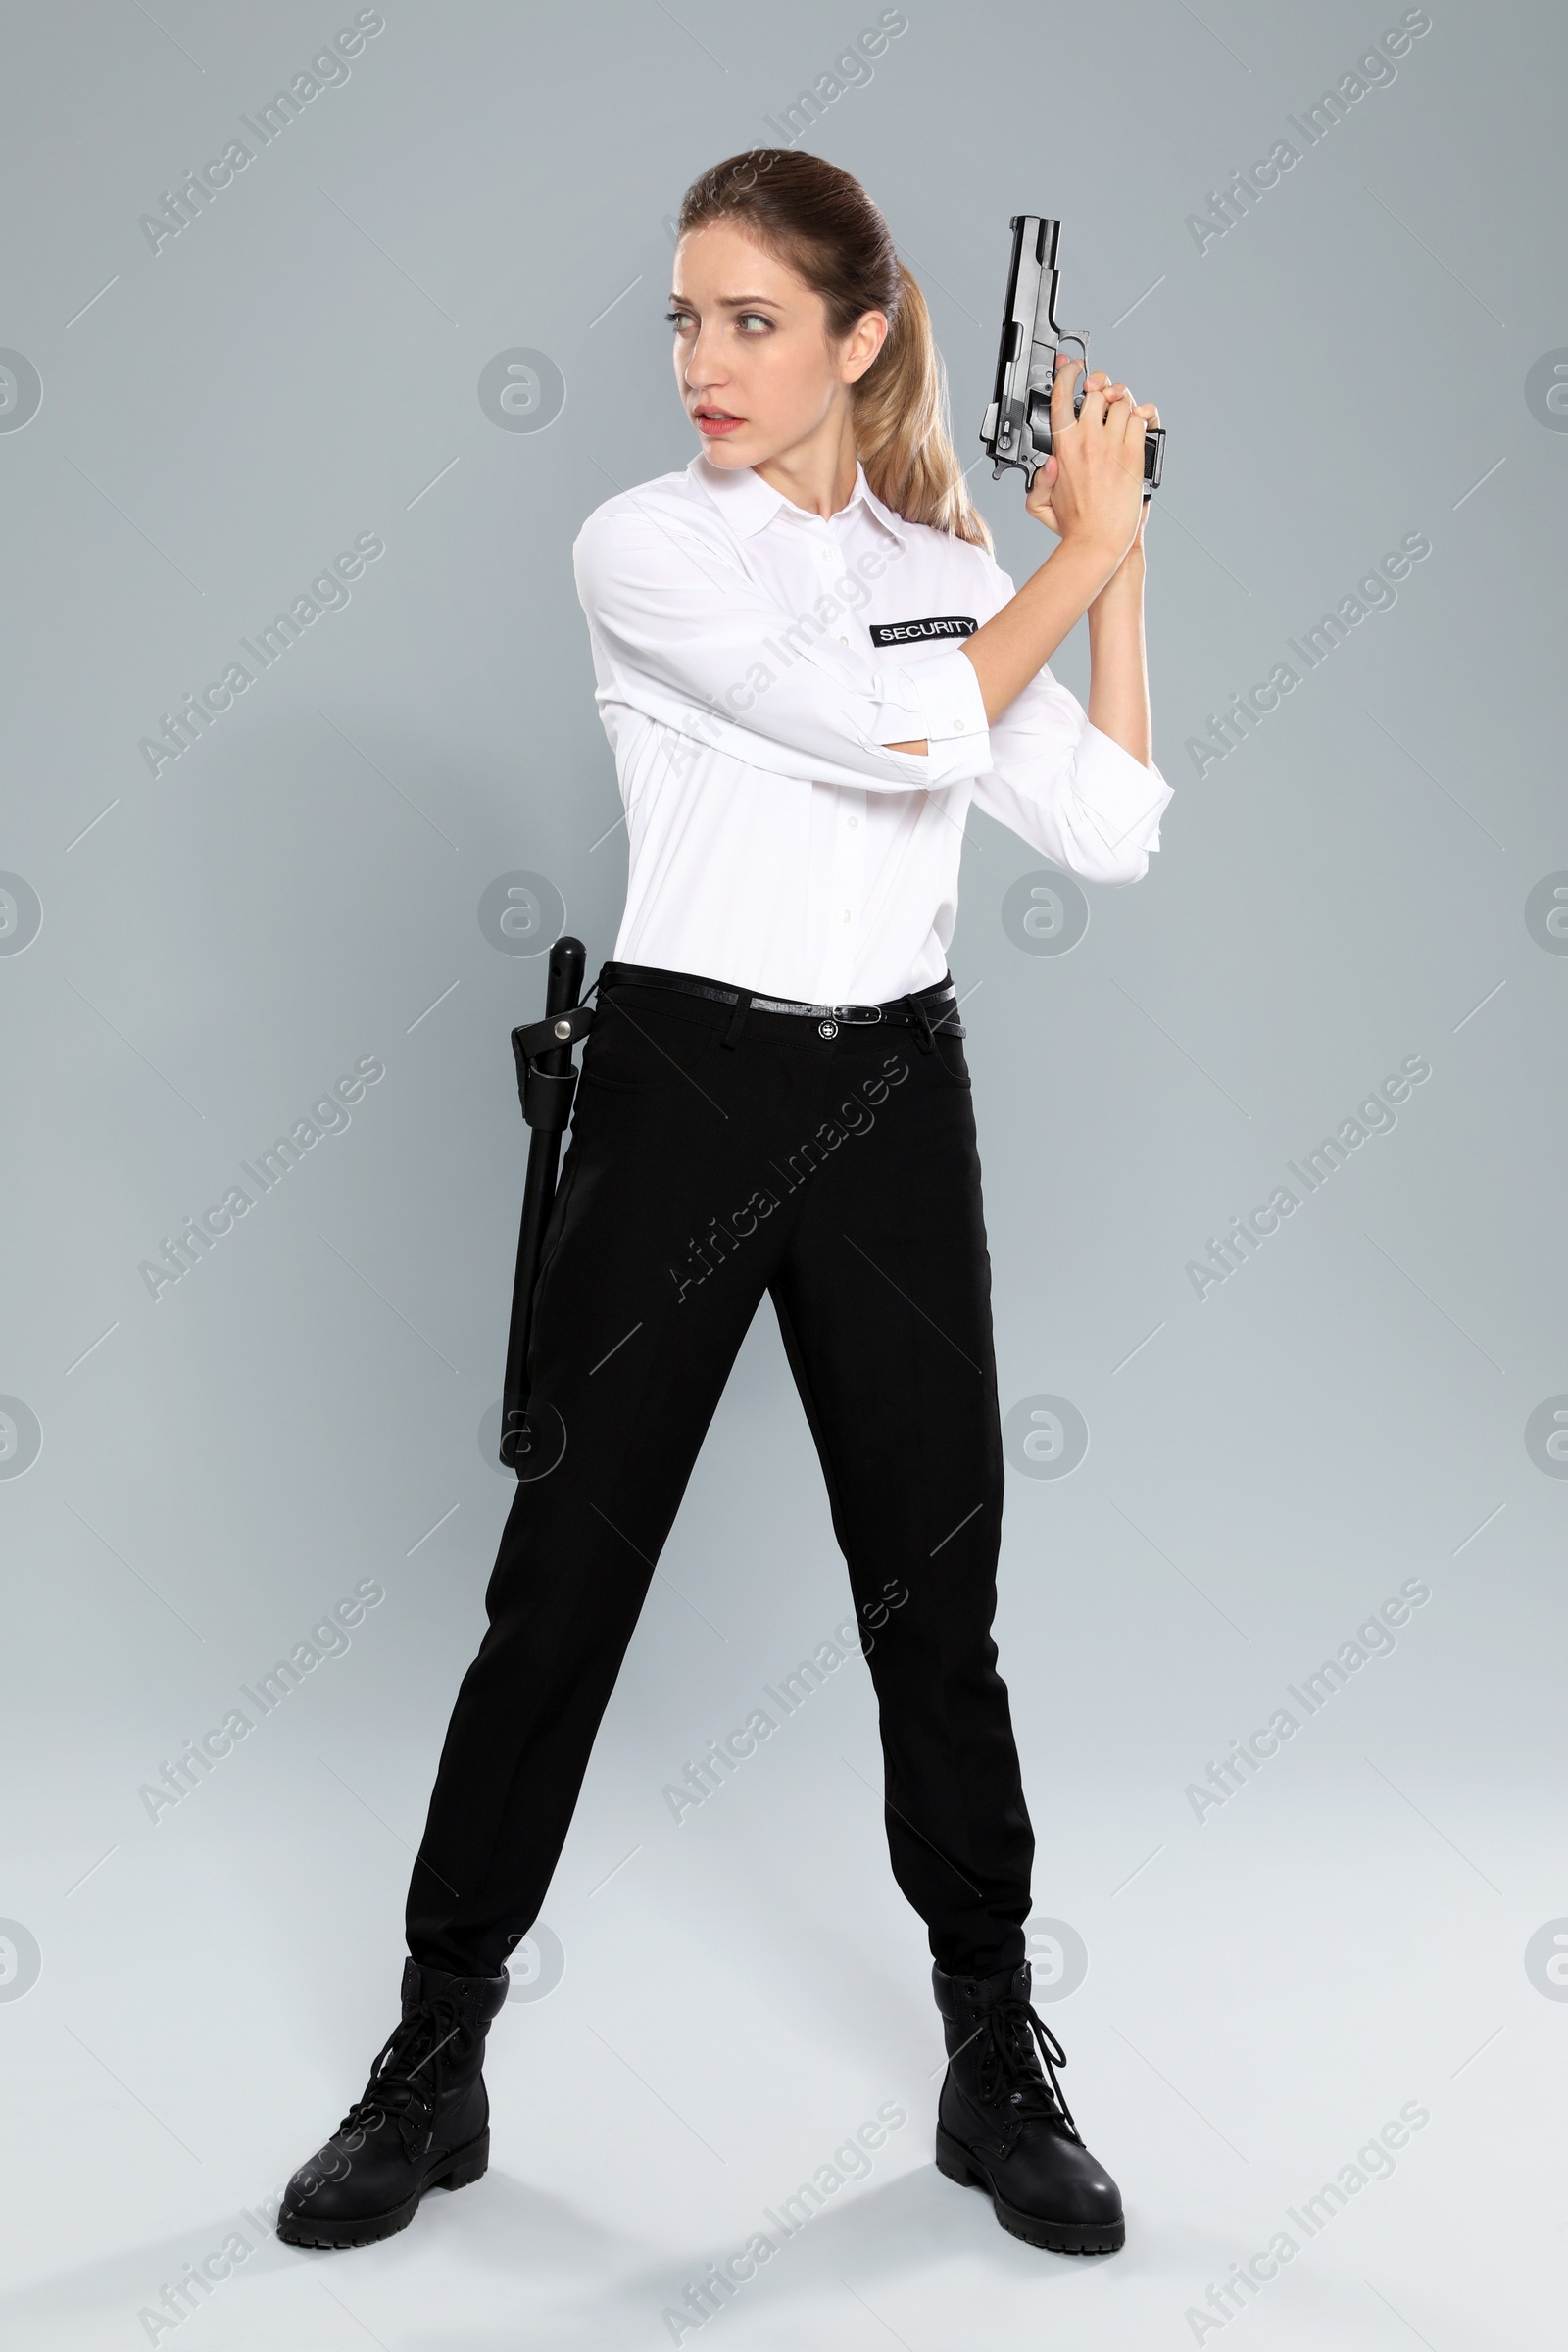 Photo of Female security guard in uniform with gun on grey background